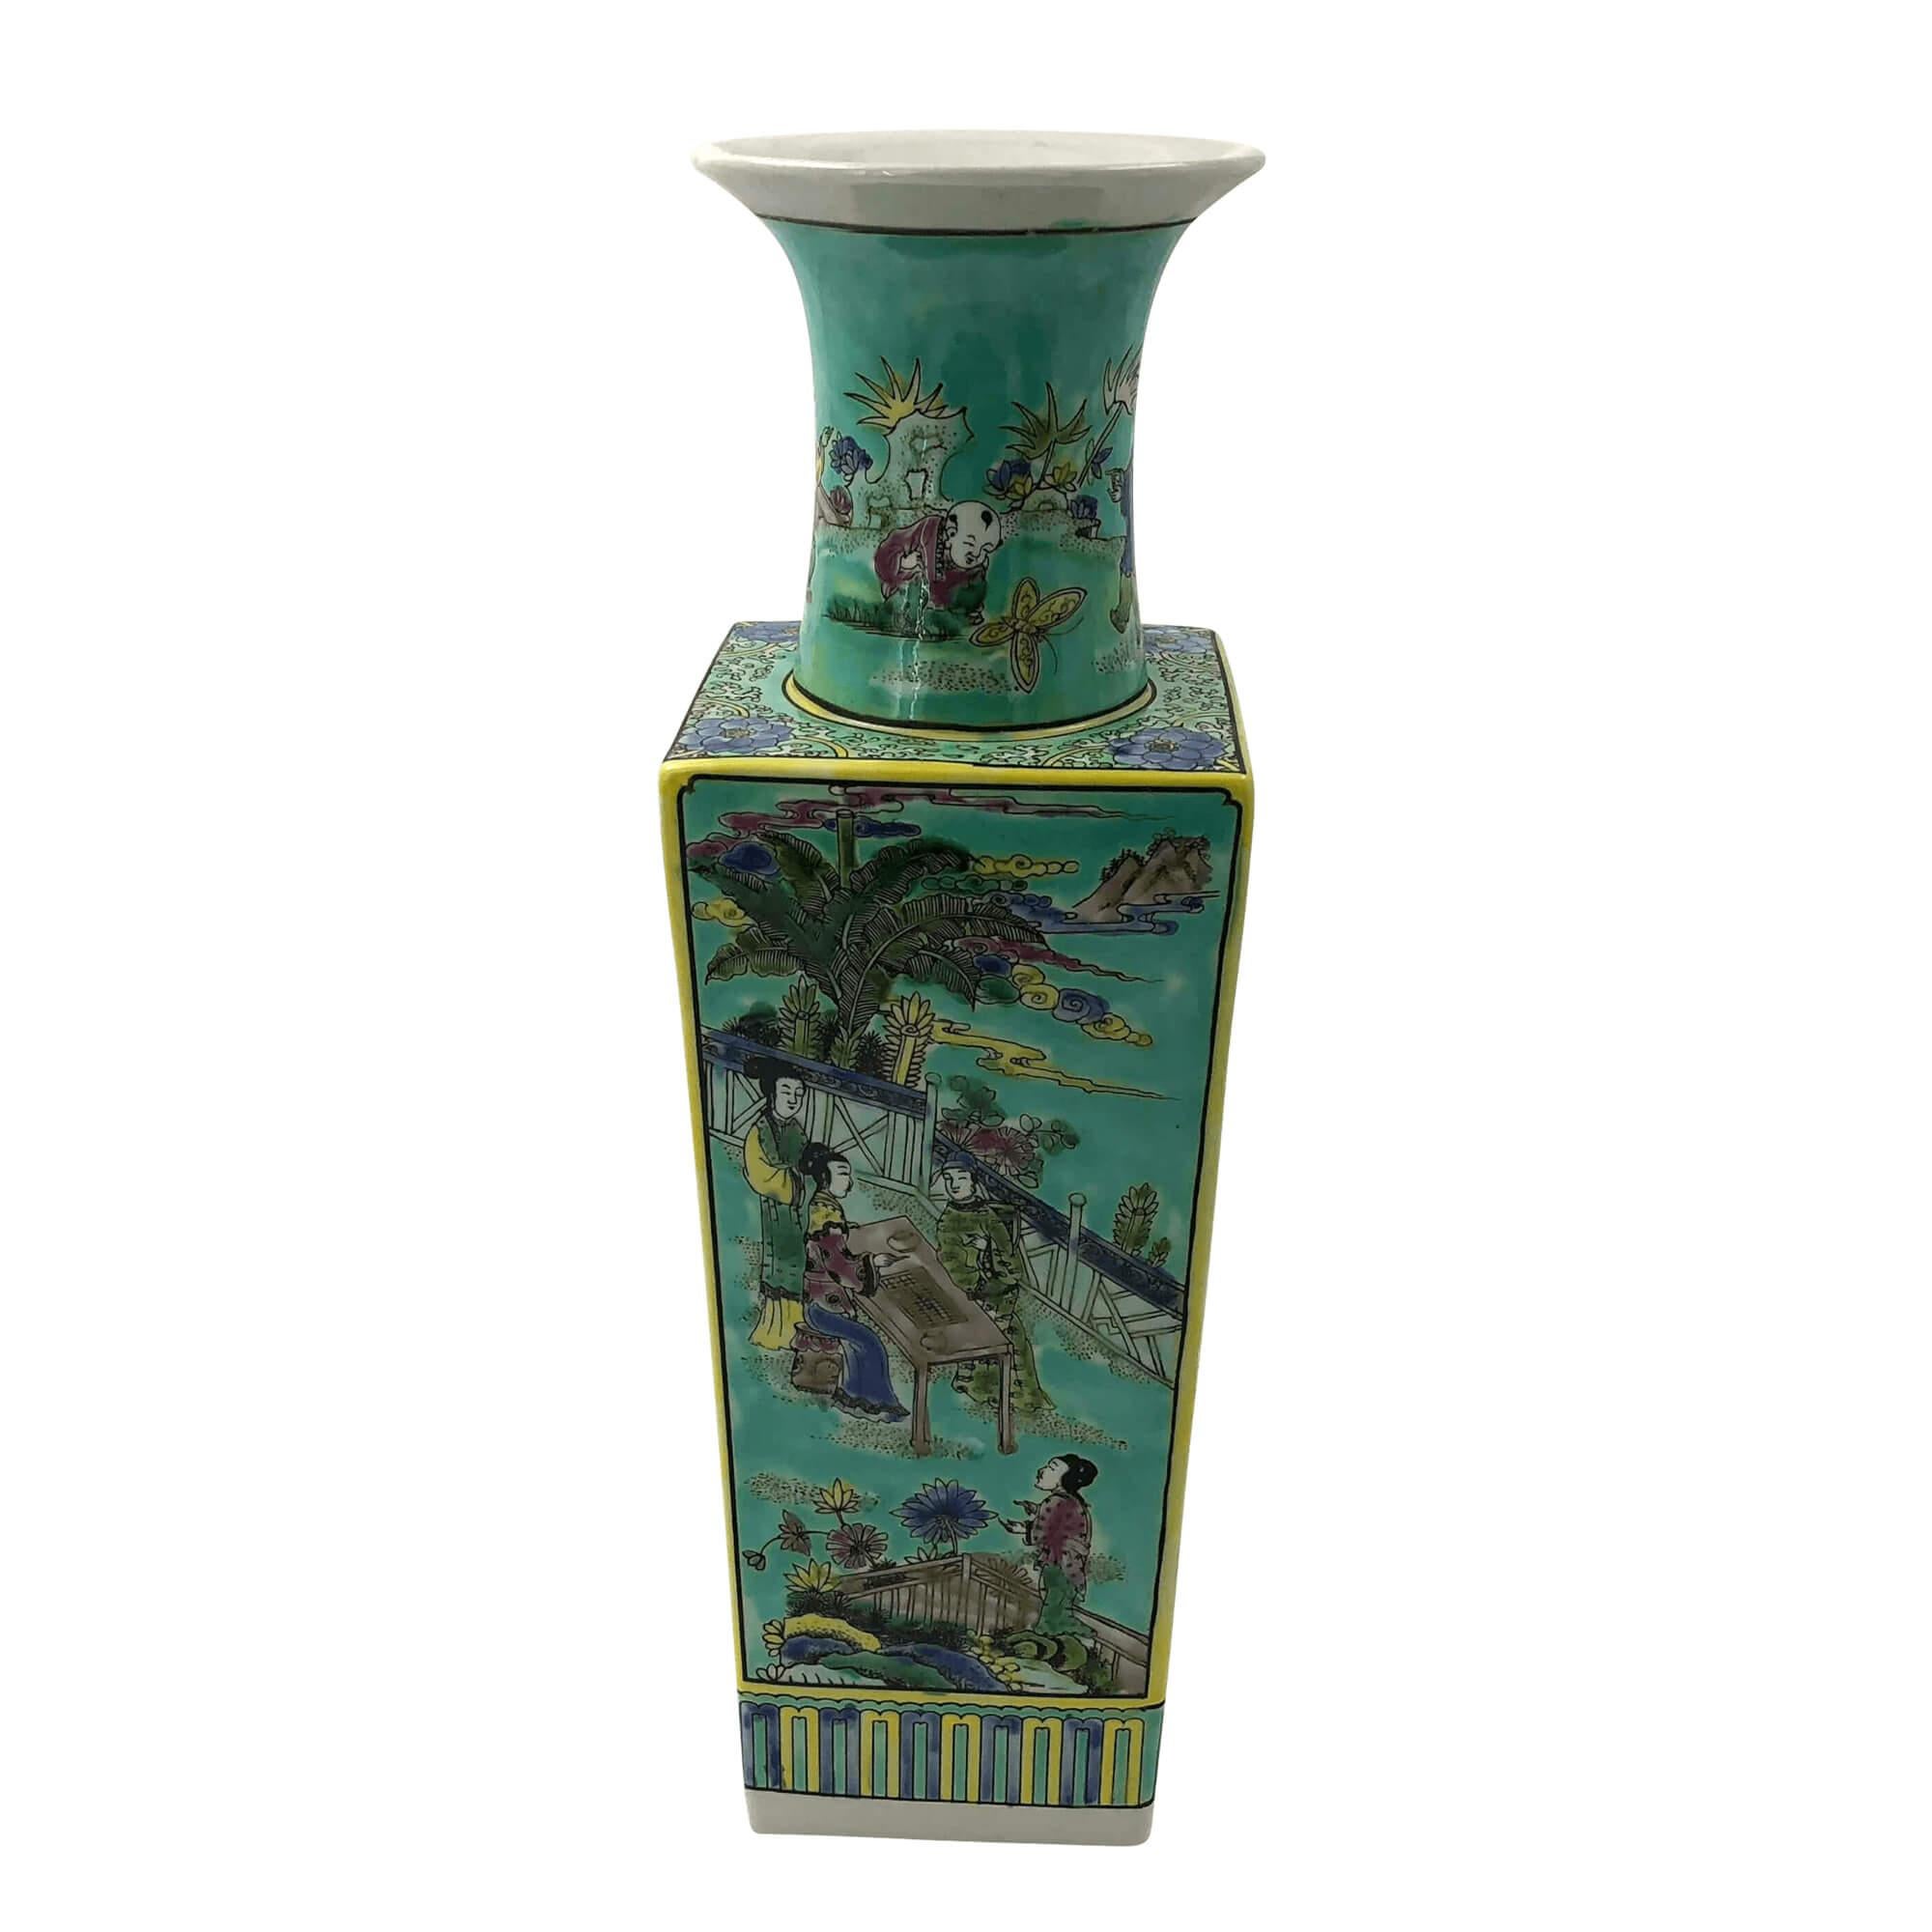 Tall Chinese Famille rose squared tapered flower vases decorated with Chinese scenes.

Dimensions: 6.25